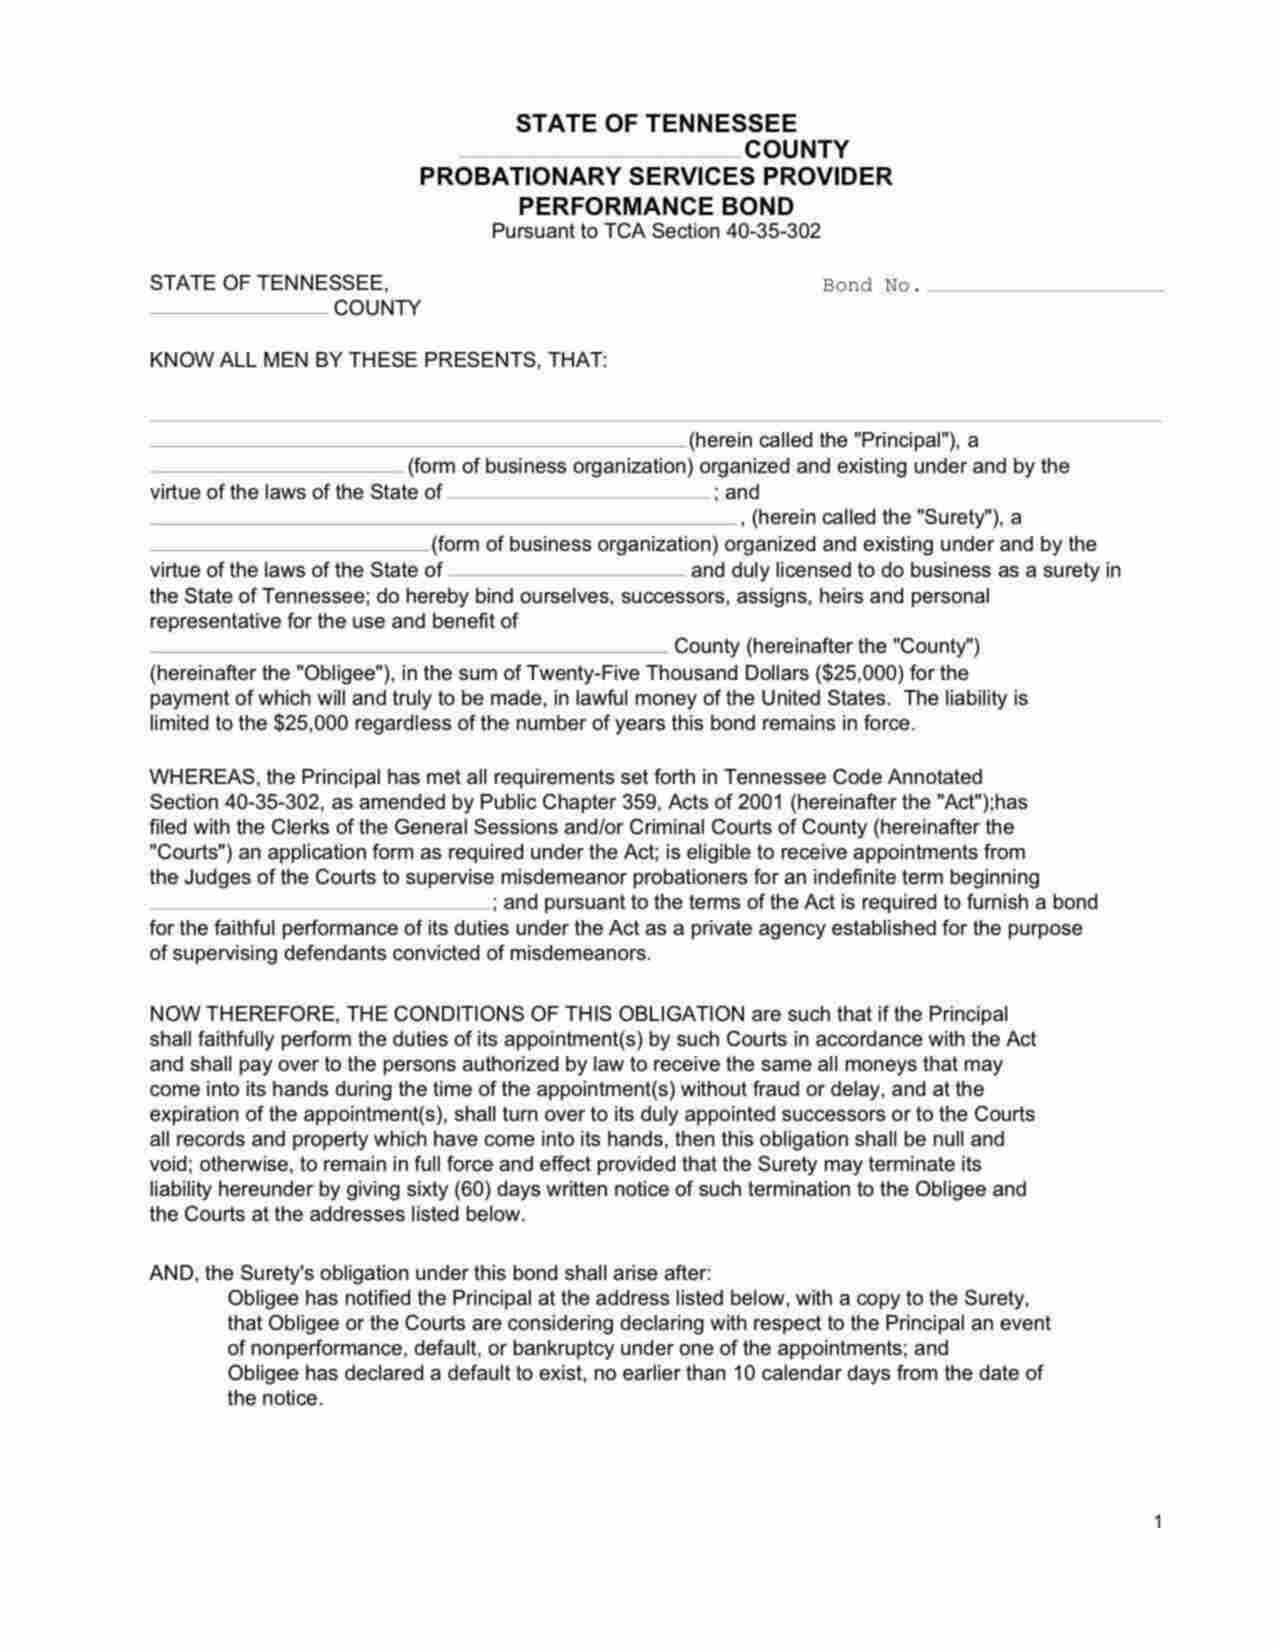 Tennessee Probationary Services Provider Bond Form